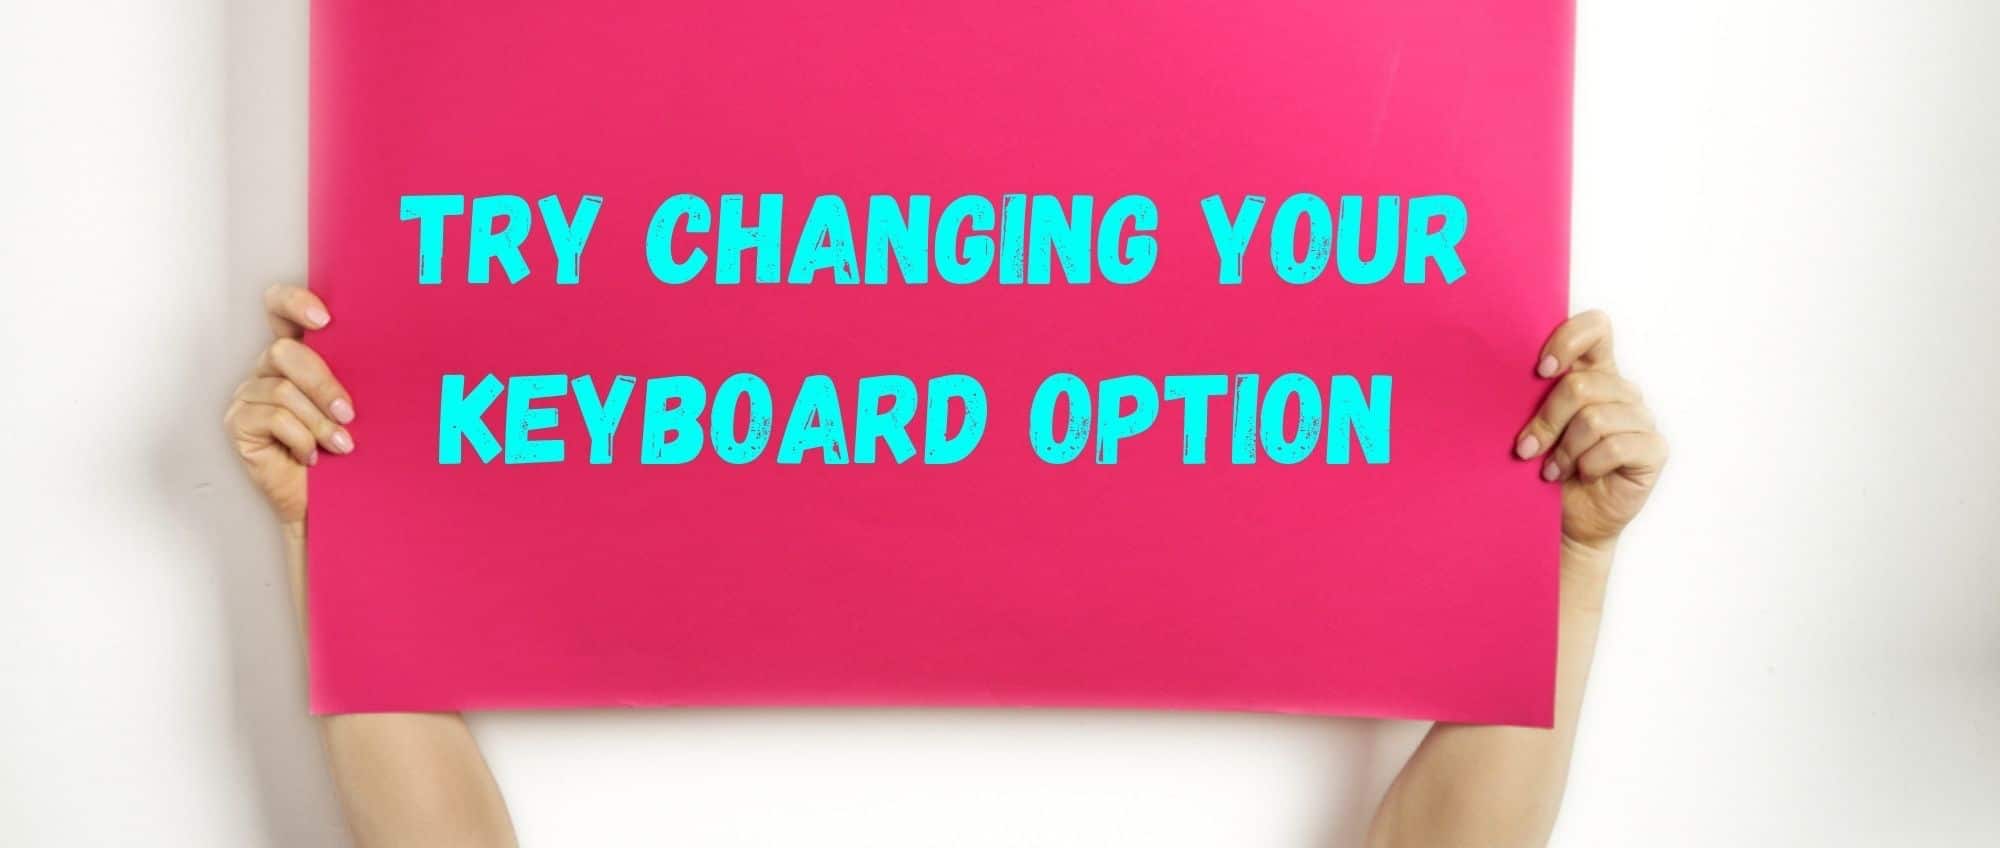 Try changing your keyboard option 